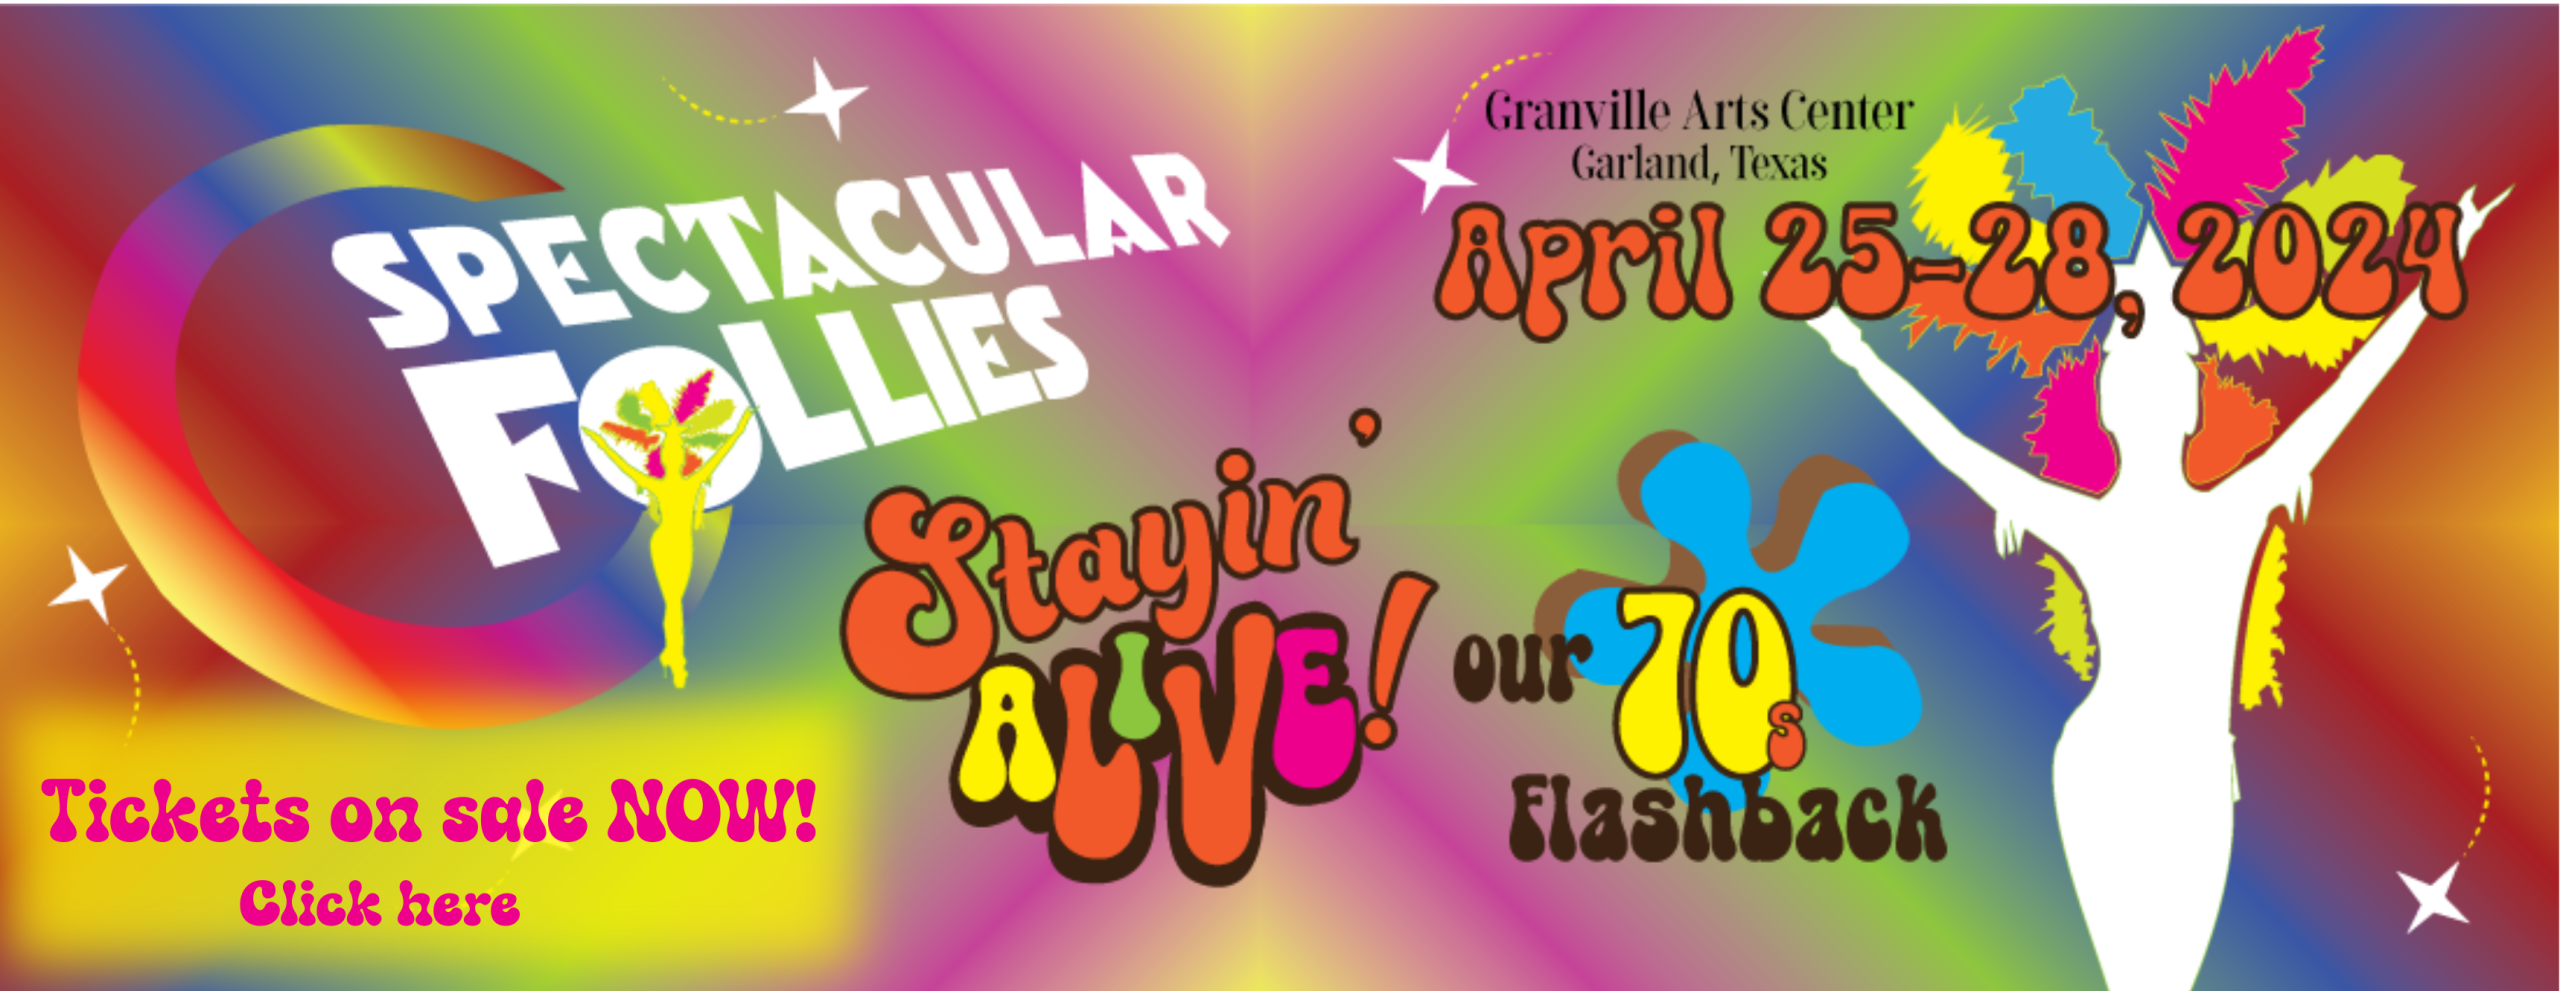 stayin-alive-tickets-on-sale